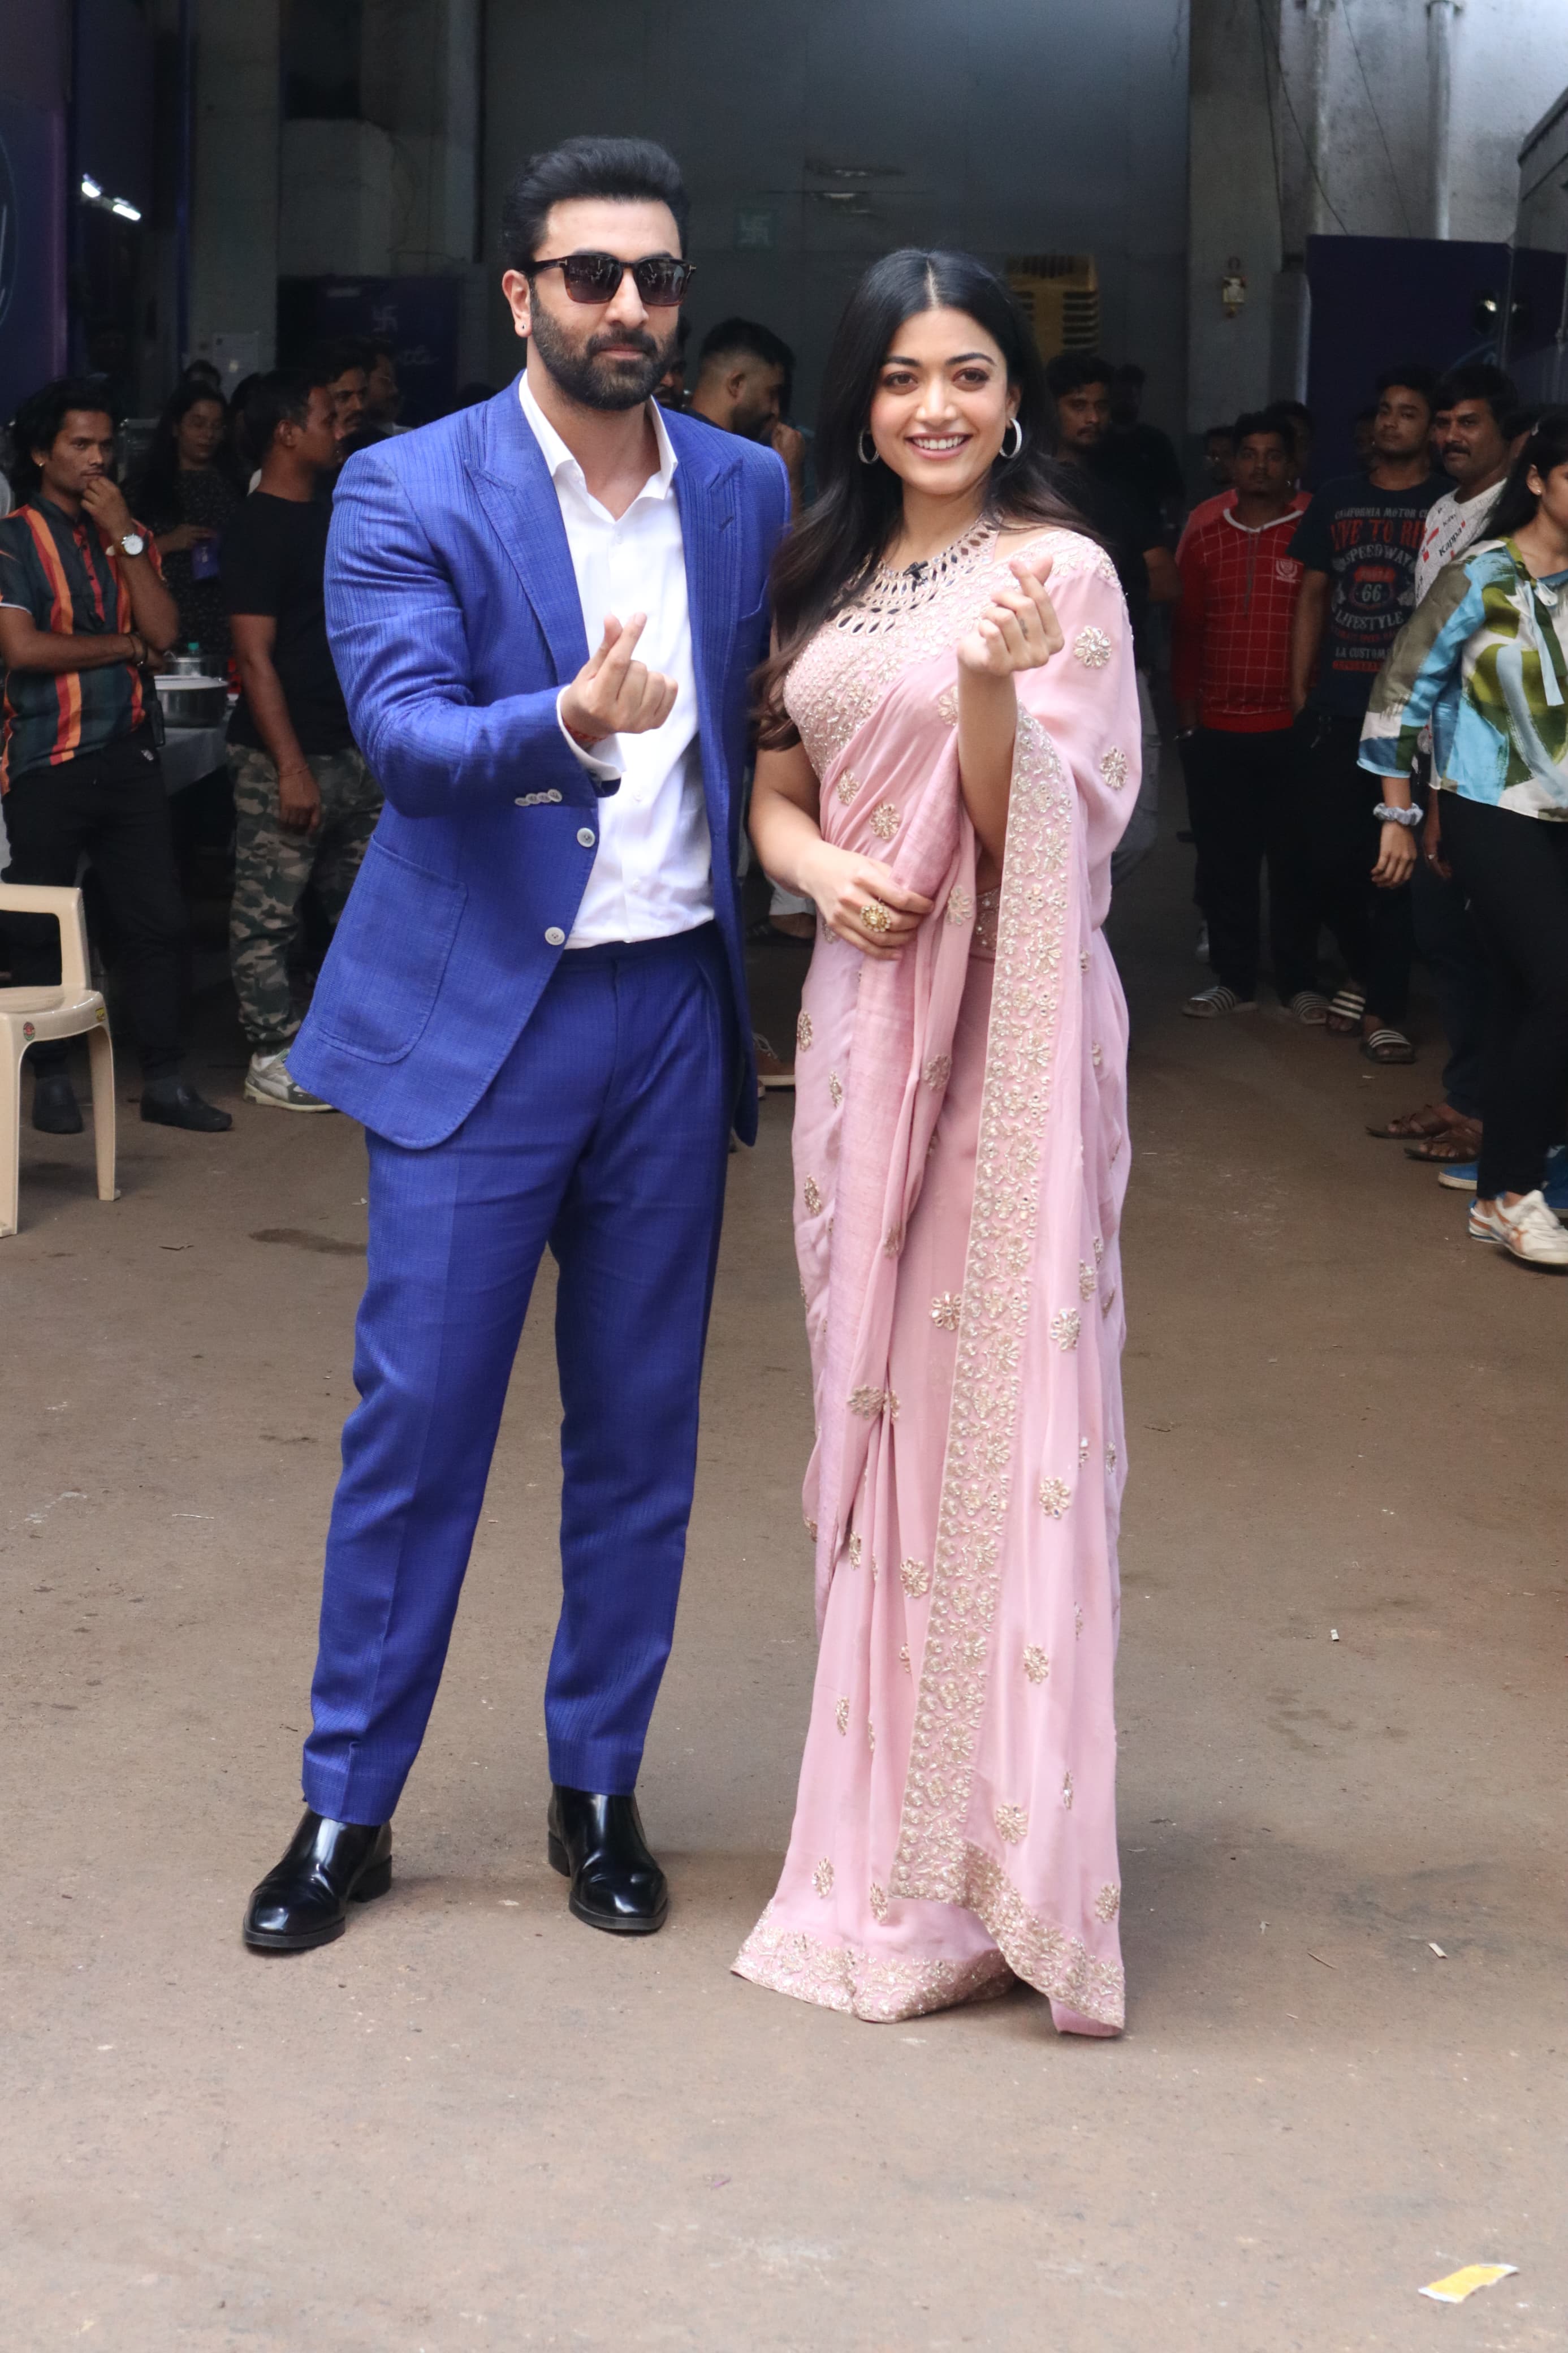 Ranbir Kapoor was clicked wearing a blue suit while Rashmika Mandanna aced her traditional look  in pink six yards as they were clicked promoting Animal